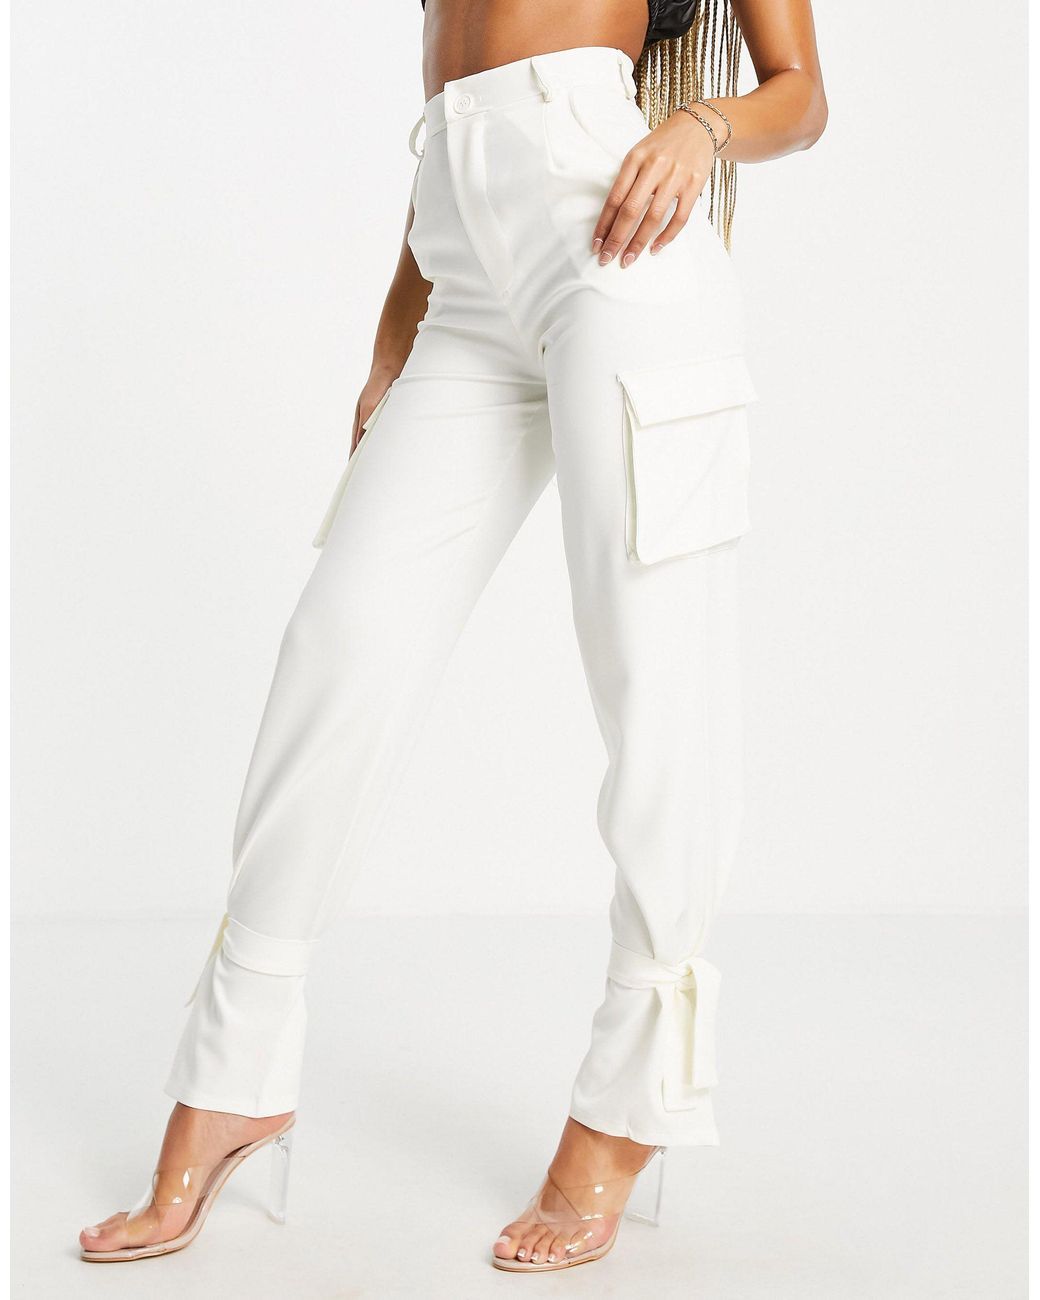 Missy Empire Parachute Cargo Trousers in White  Lyst UK